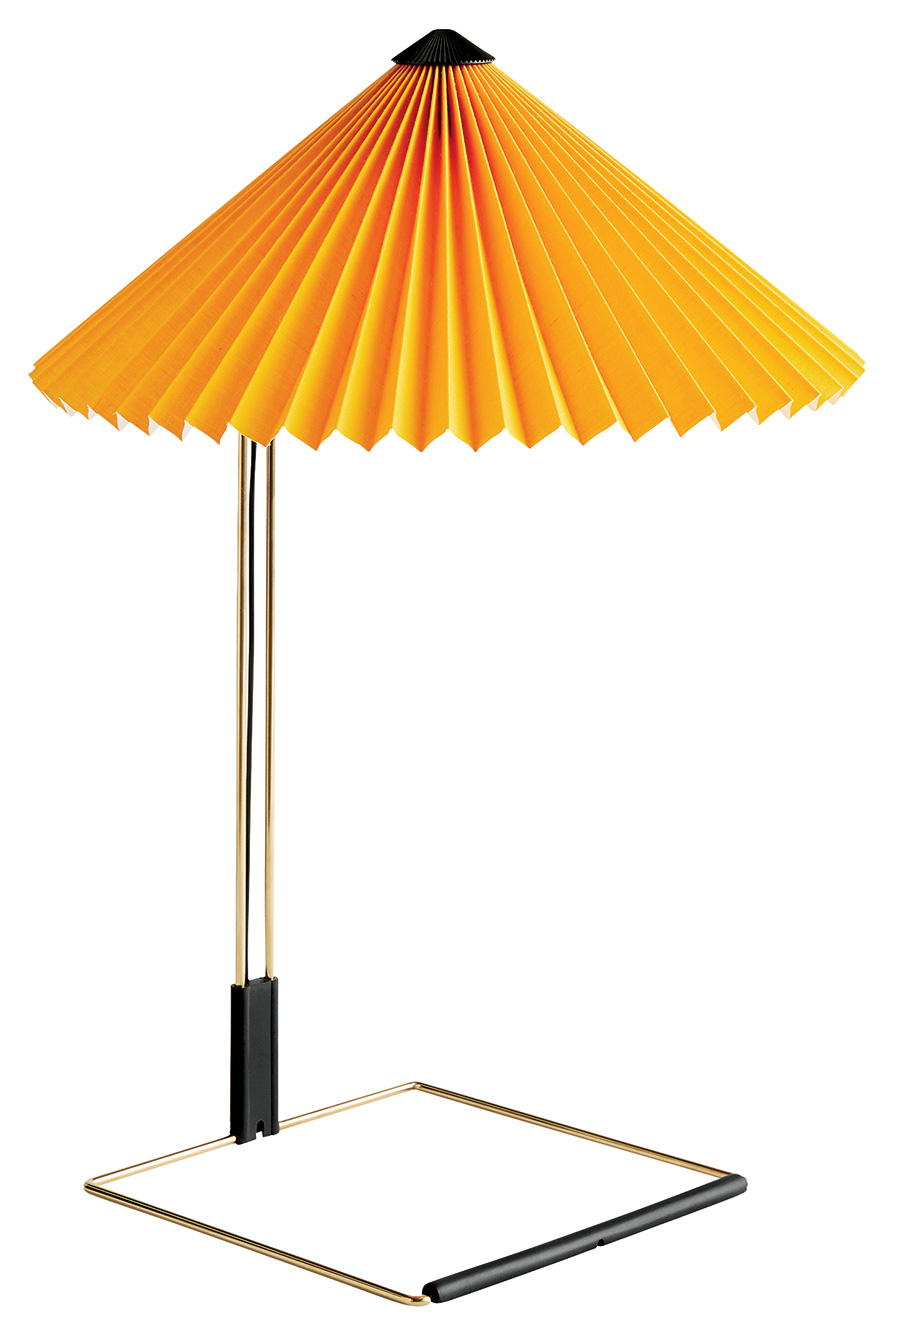 Polished brass table lamp with PVC-laminated cotton shade